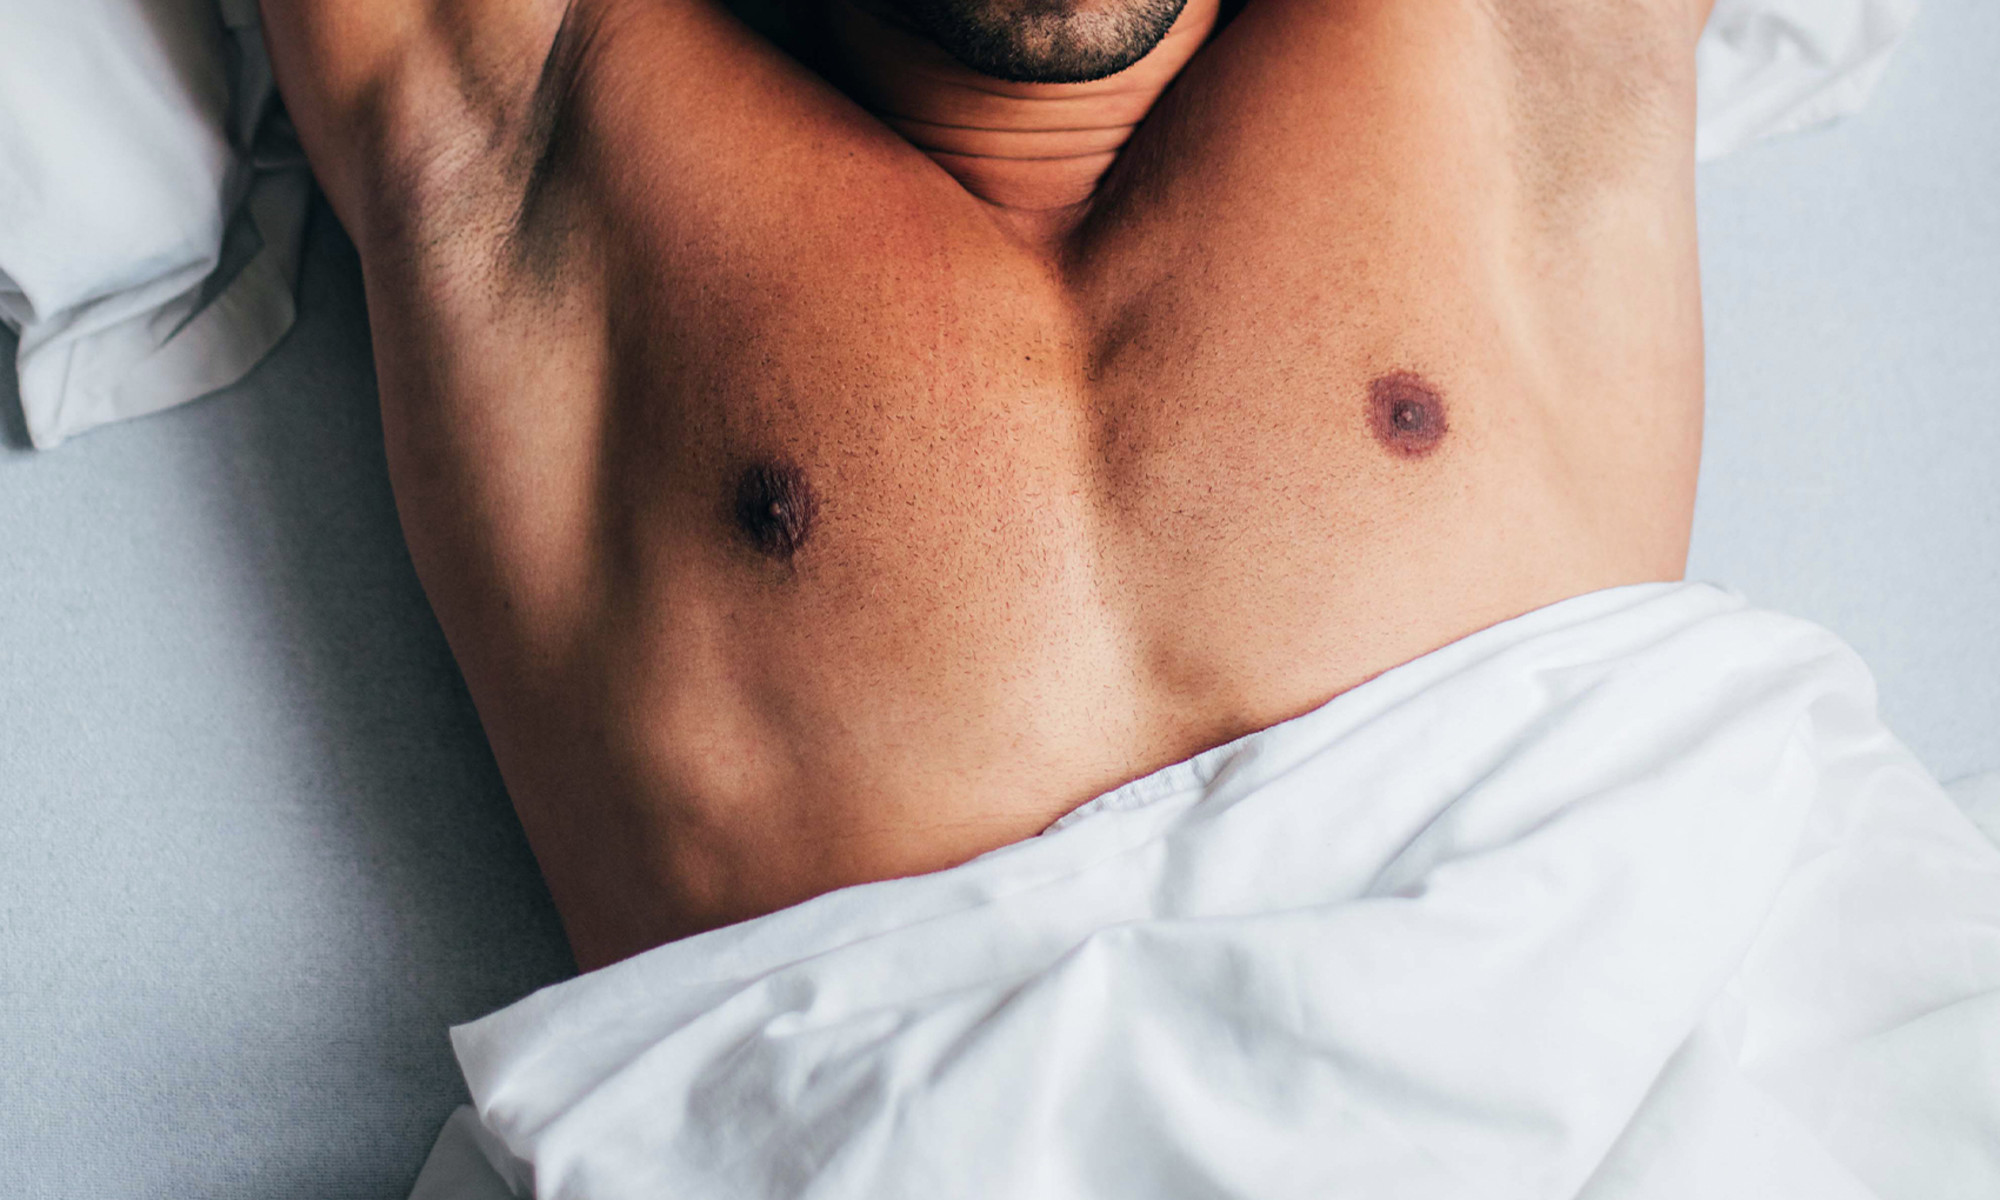 How To Use Male Nipple Play In Bed 17 Techniques and FAQs mindbodygreen image